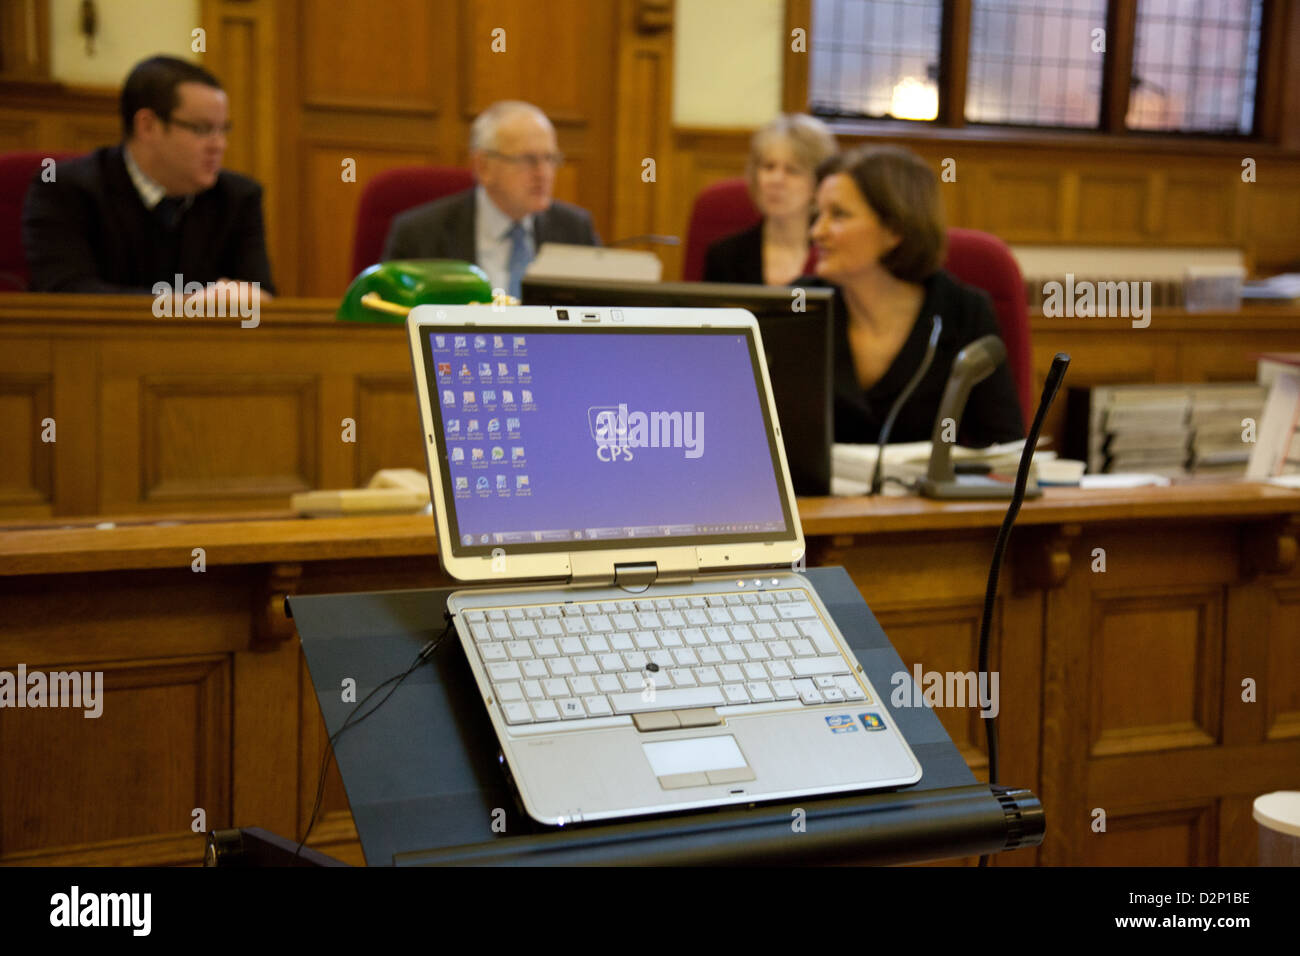 Photo which illustrates the use of technology inside court, in particular a tablet. Pictures is Maidstone Magistrates in Kent Stock Photo